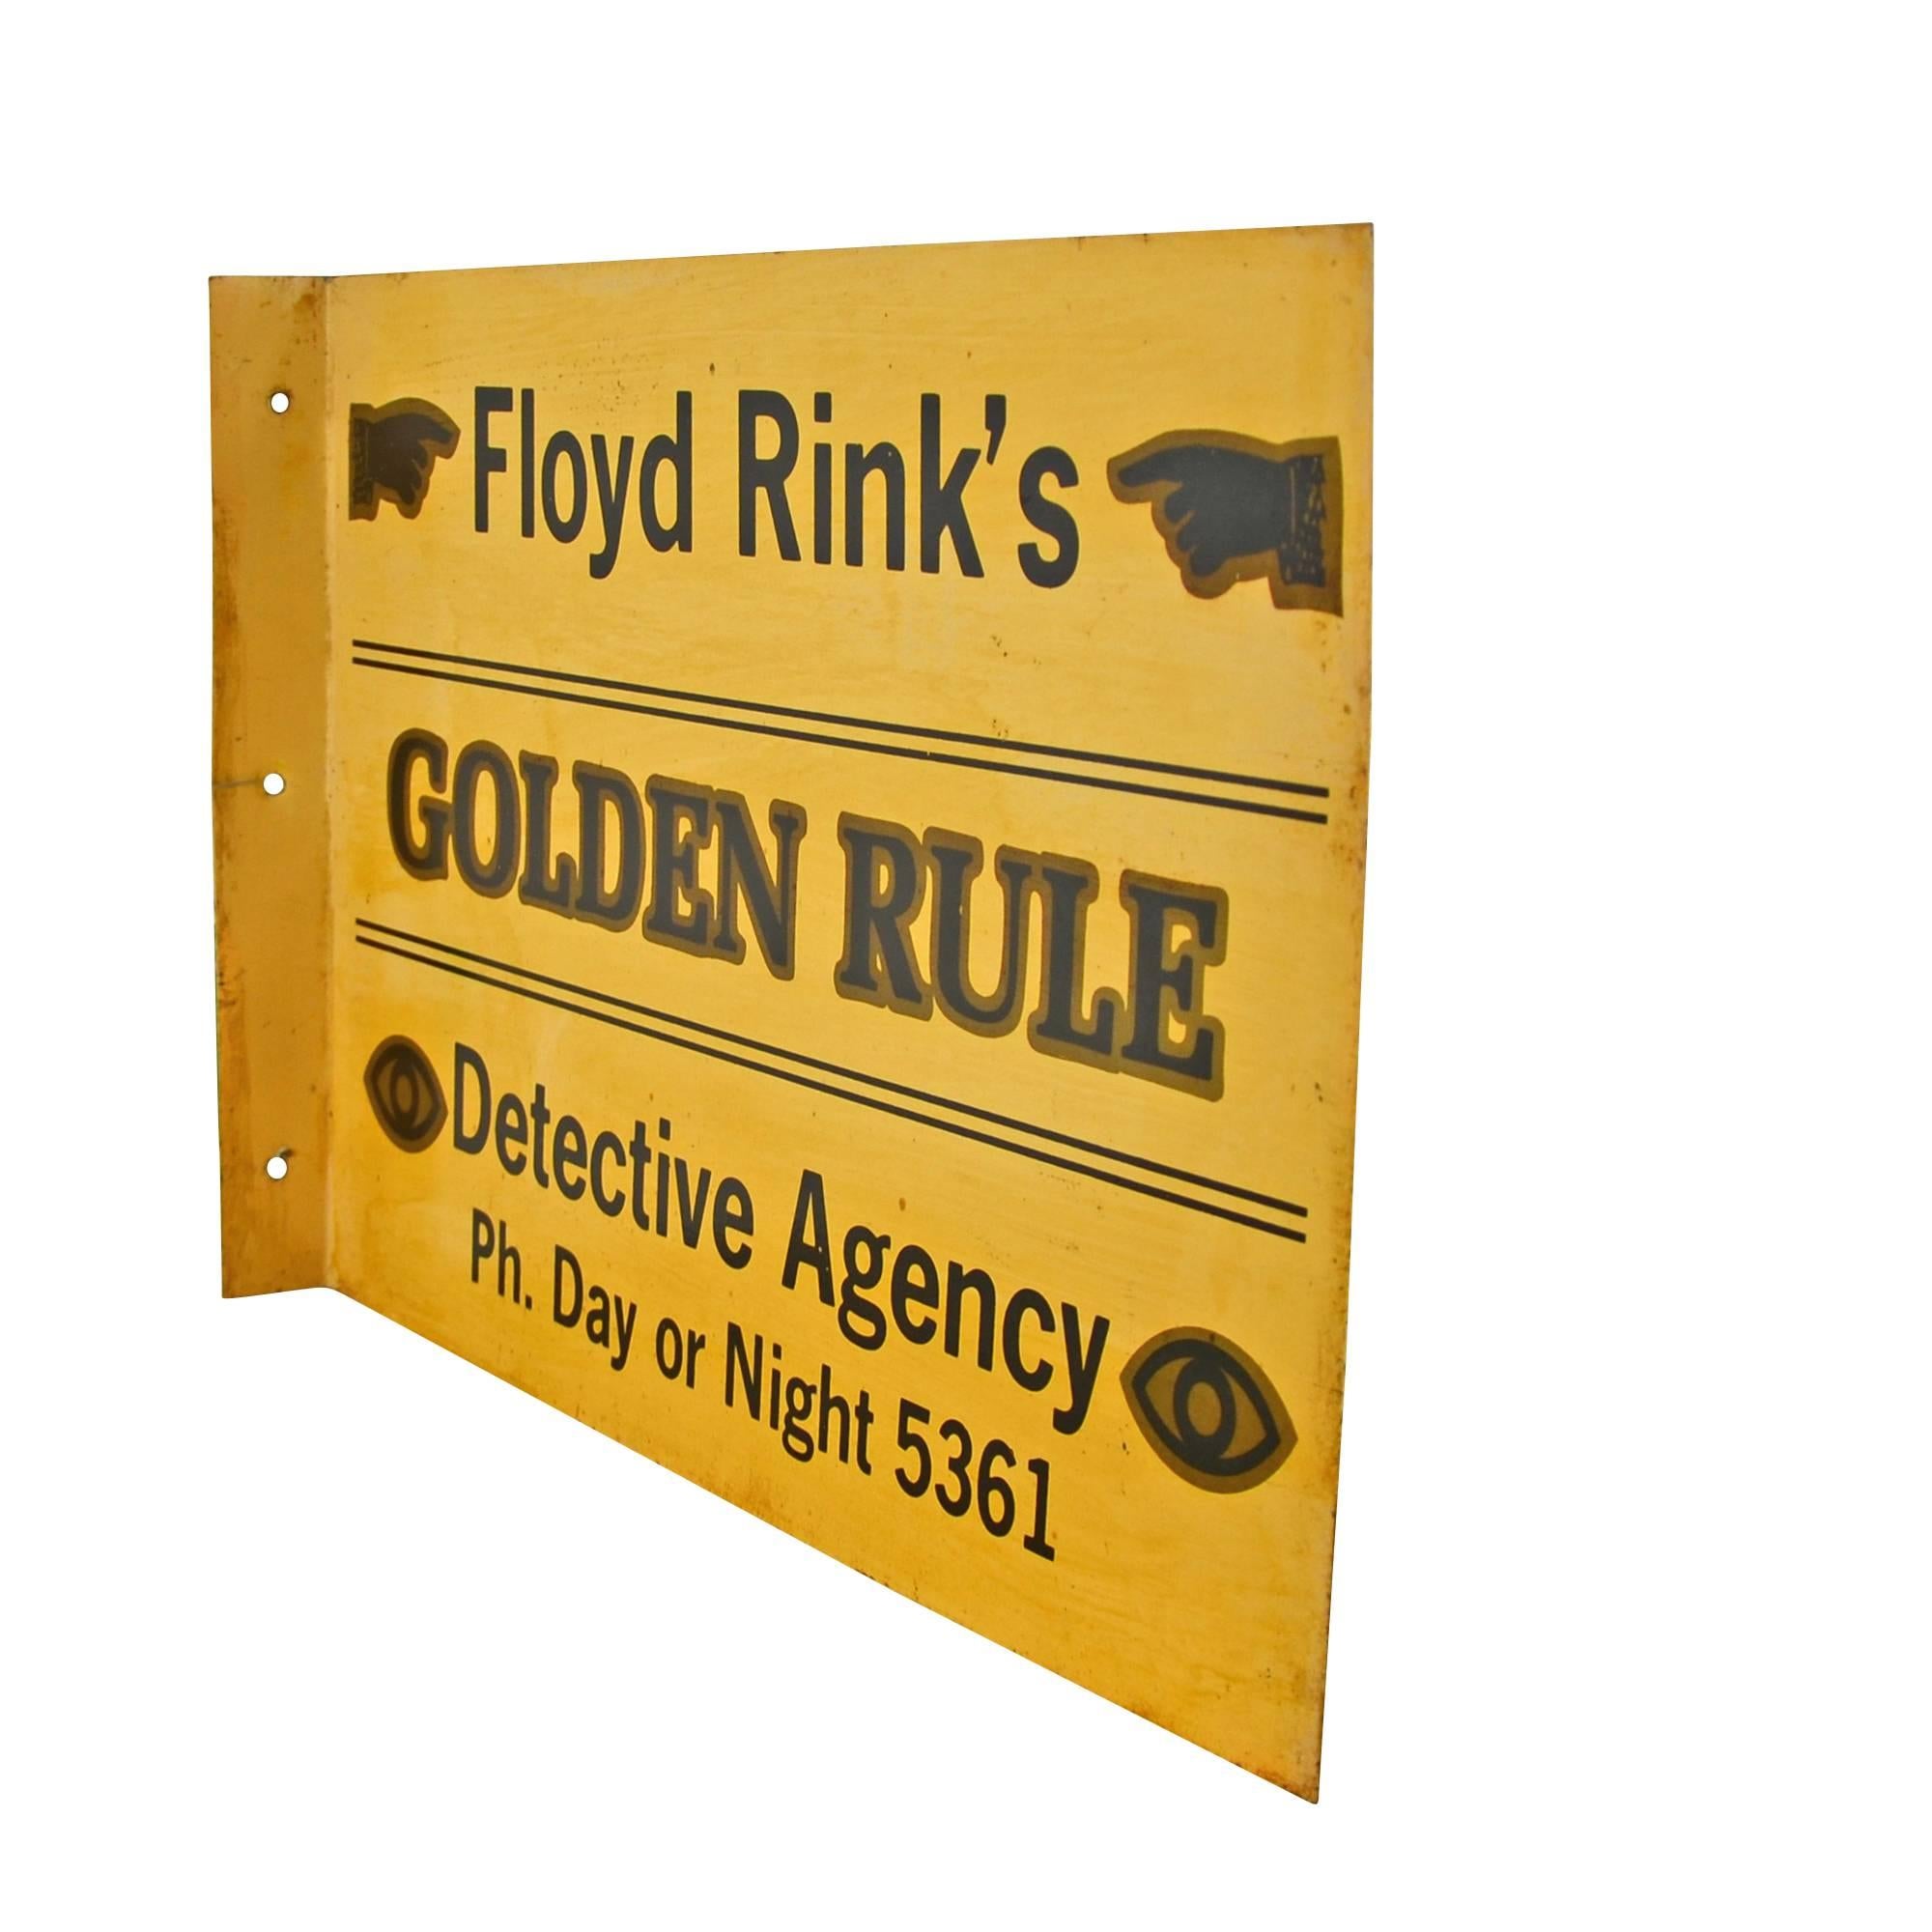 We are obsessed with this fantastic sign, which features decal-transferred stencils in black and gold. The format and composition aside, this charming sign represents Floyd Rink's golden rule, a detective agency that promises a response to your